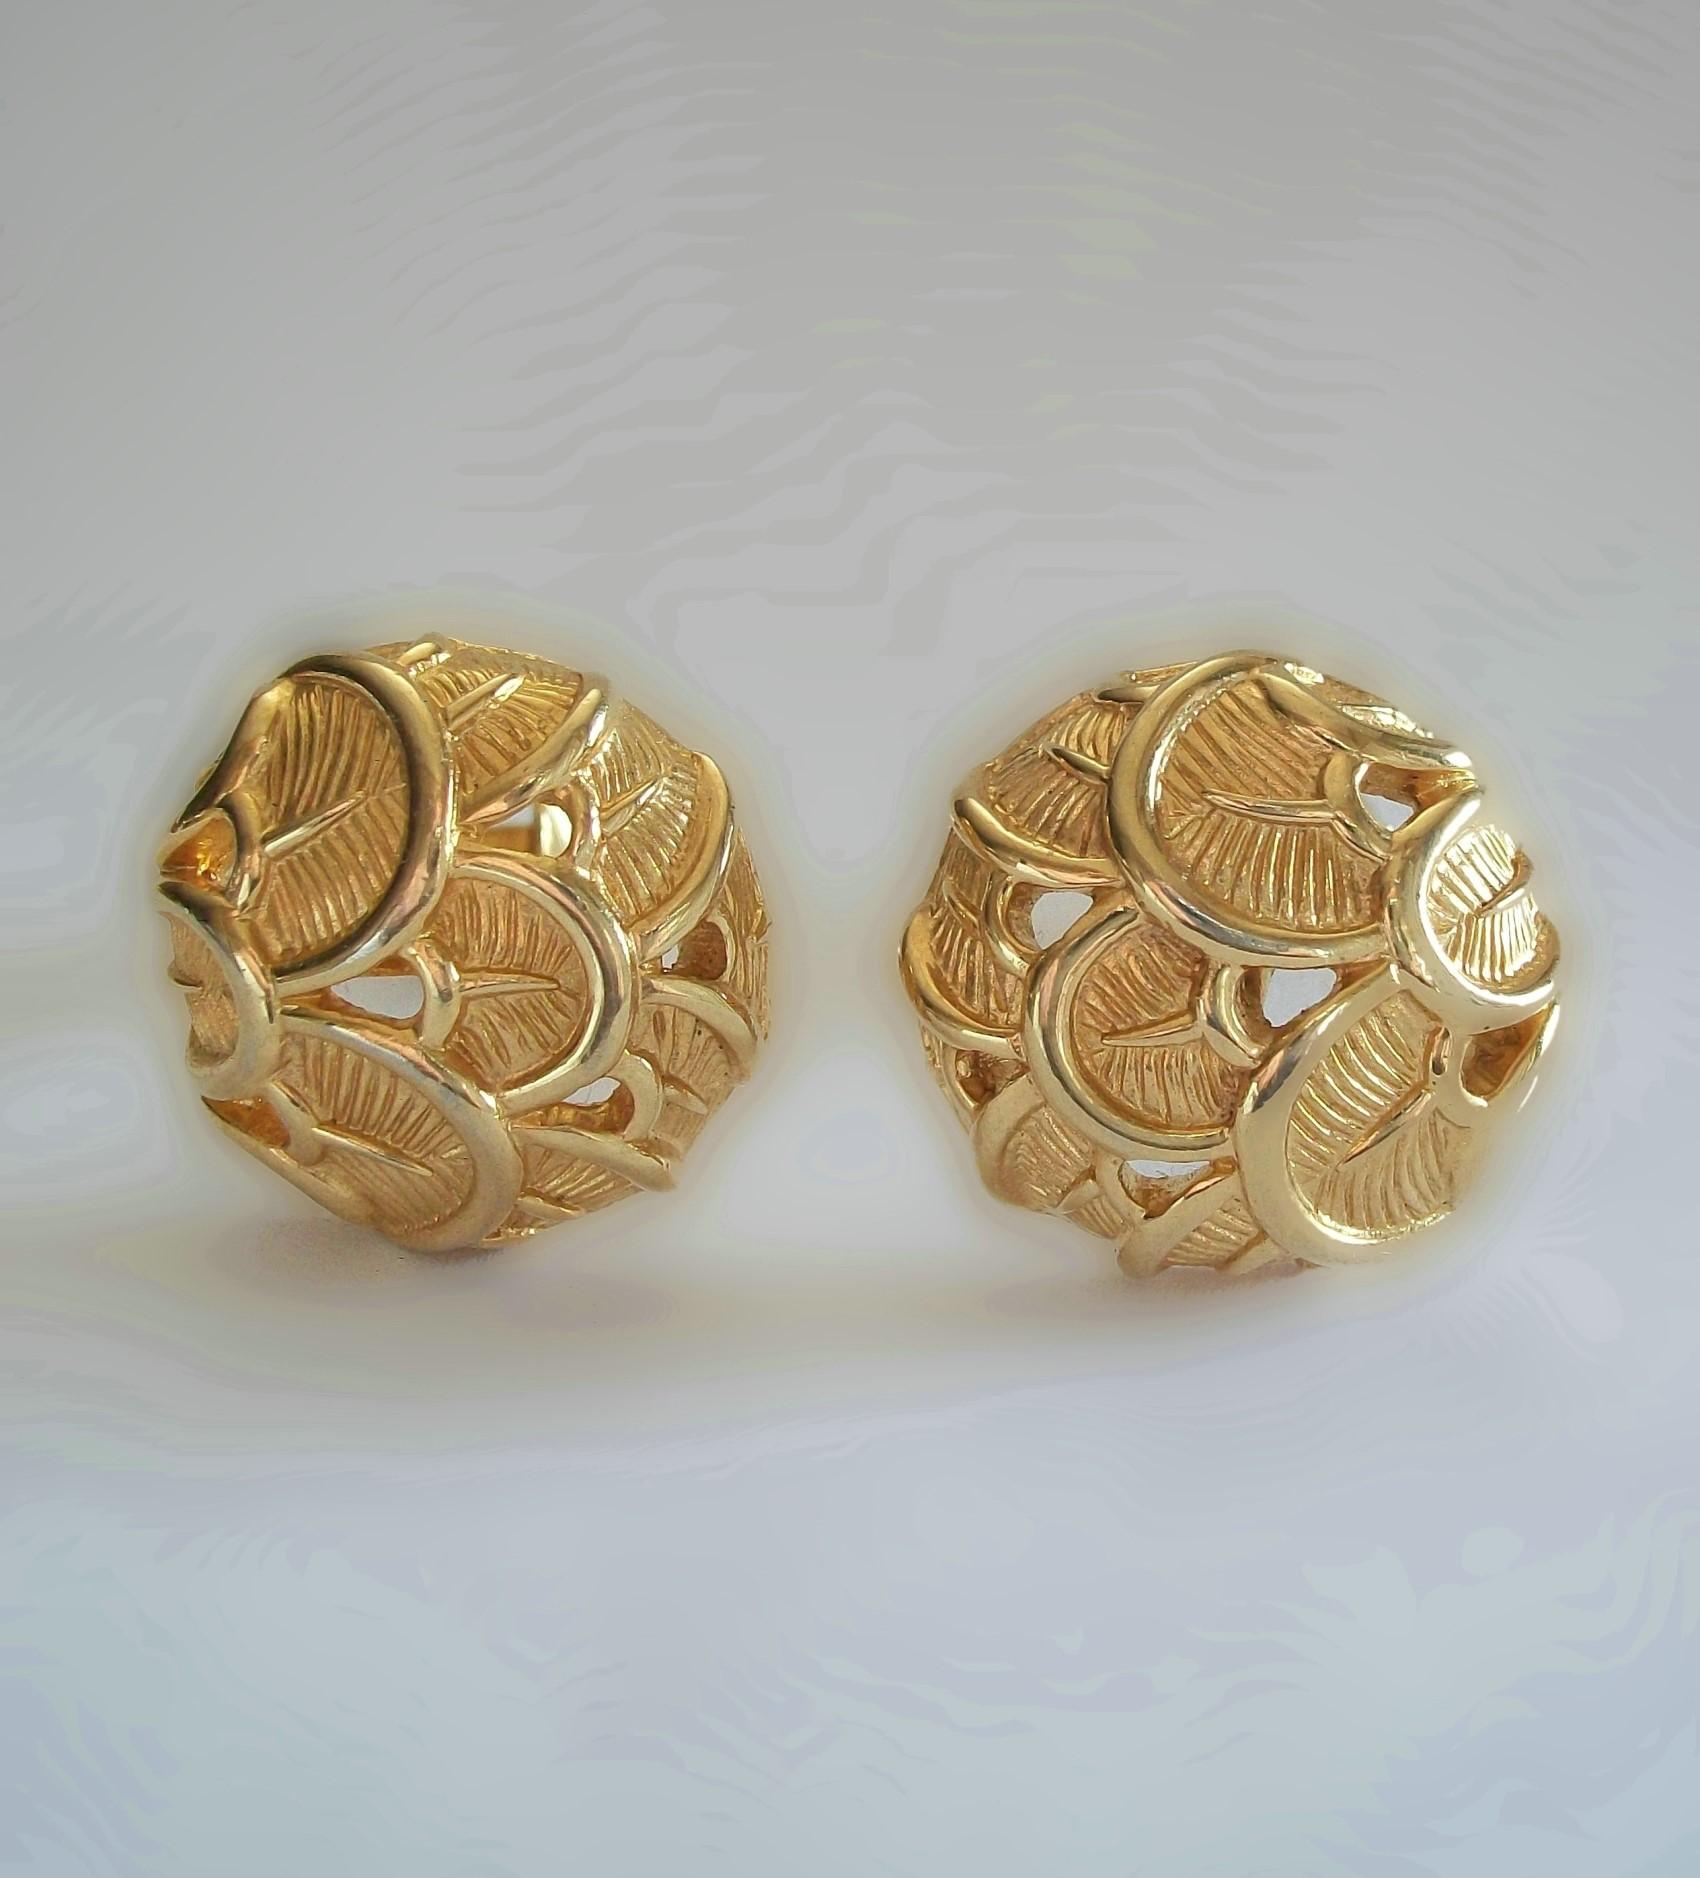 MARCEL BOUCHER - Art Deco style yellow gold tone round ear clips - each clip featuring stylized over-lapping palm leaves (a favorite Art Deco motif) with pierced elements - finest quality workmanship and detail that this brand is known for - lever